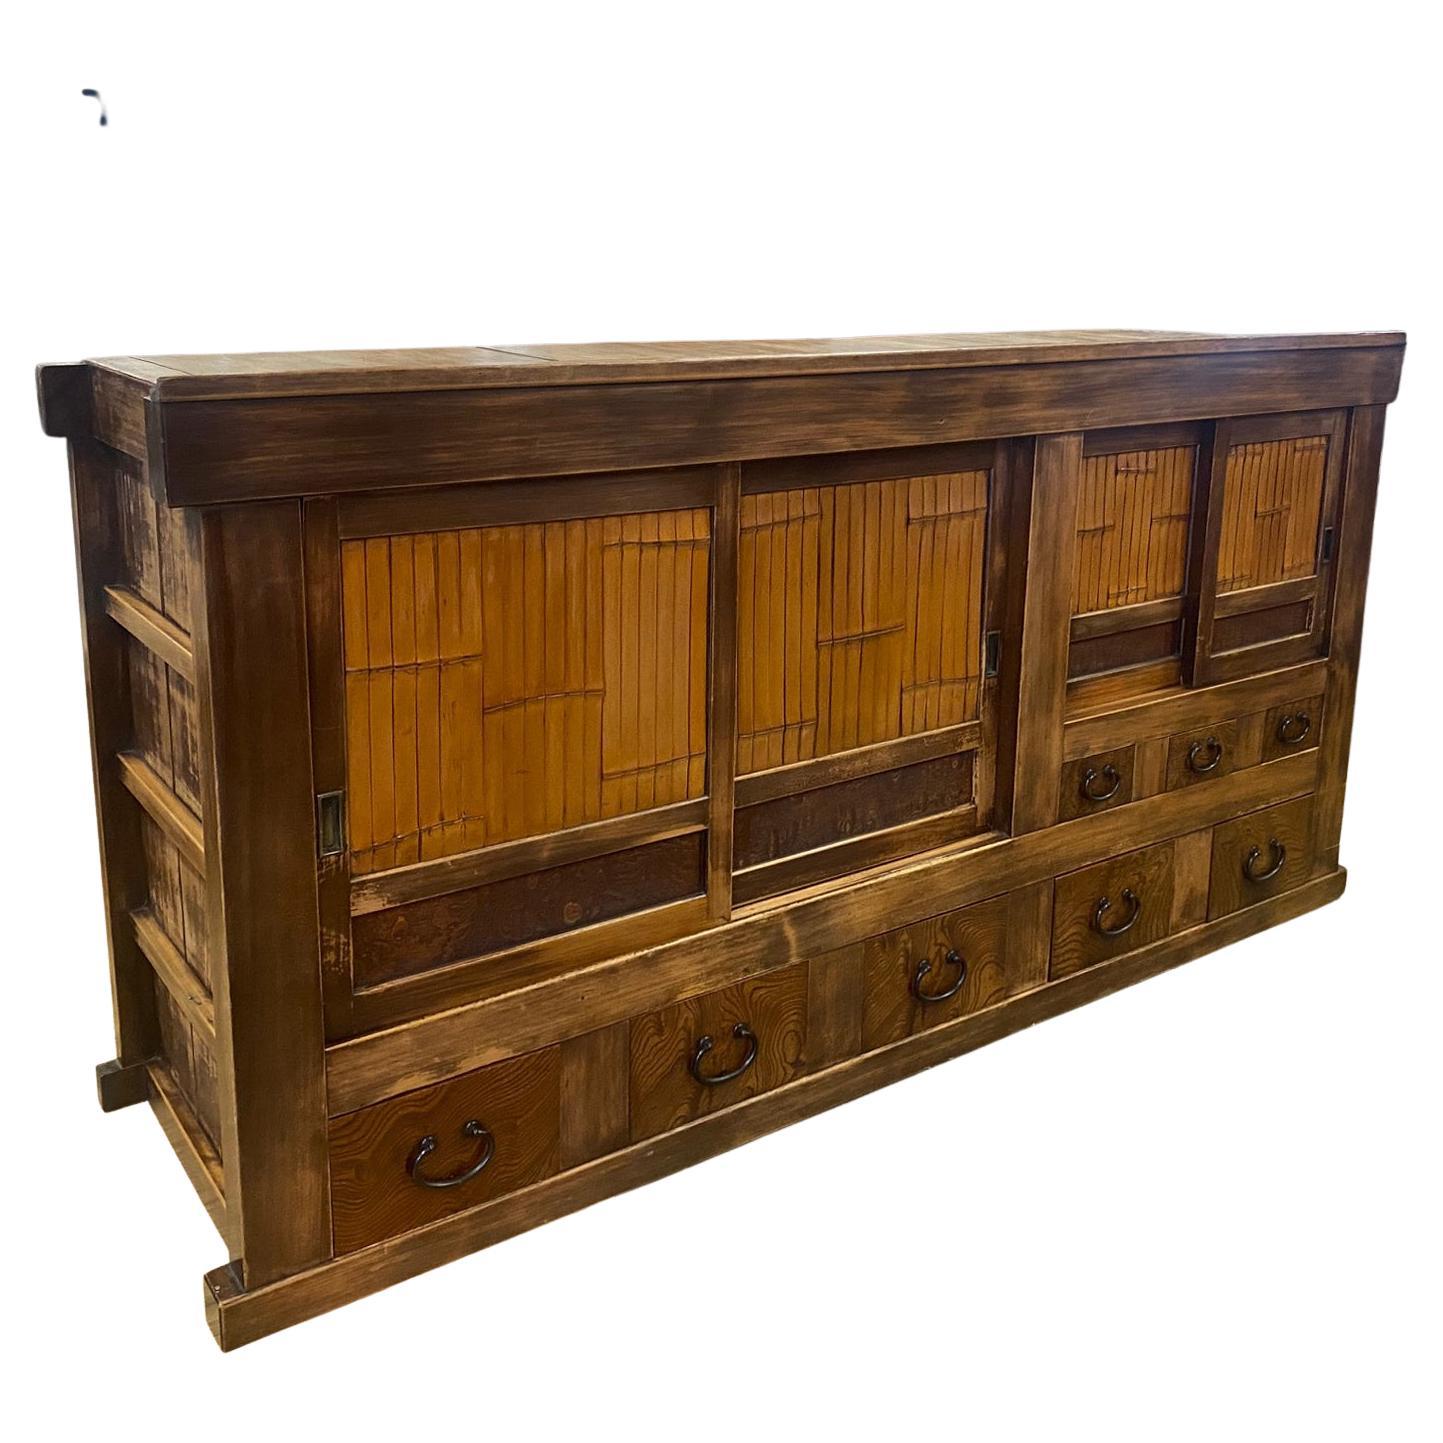 19th Century Shop Chest/Cabinet with Sliding Doors and Drawers For Sale